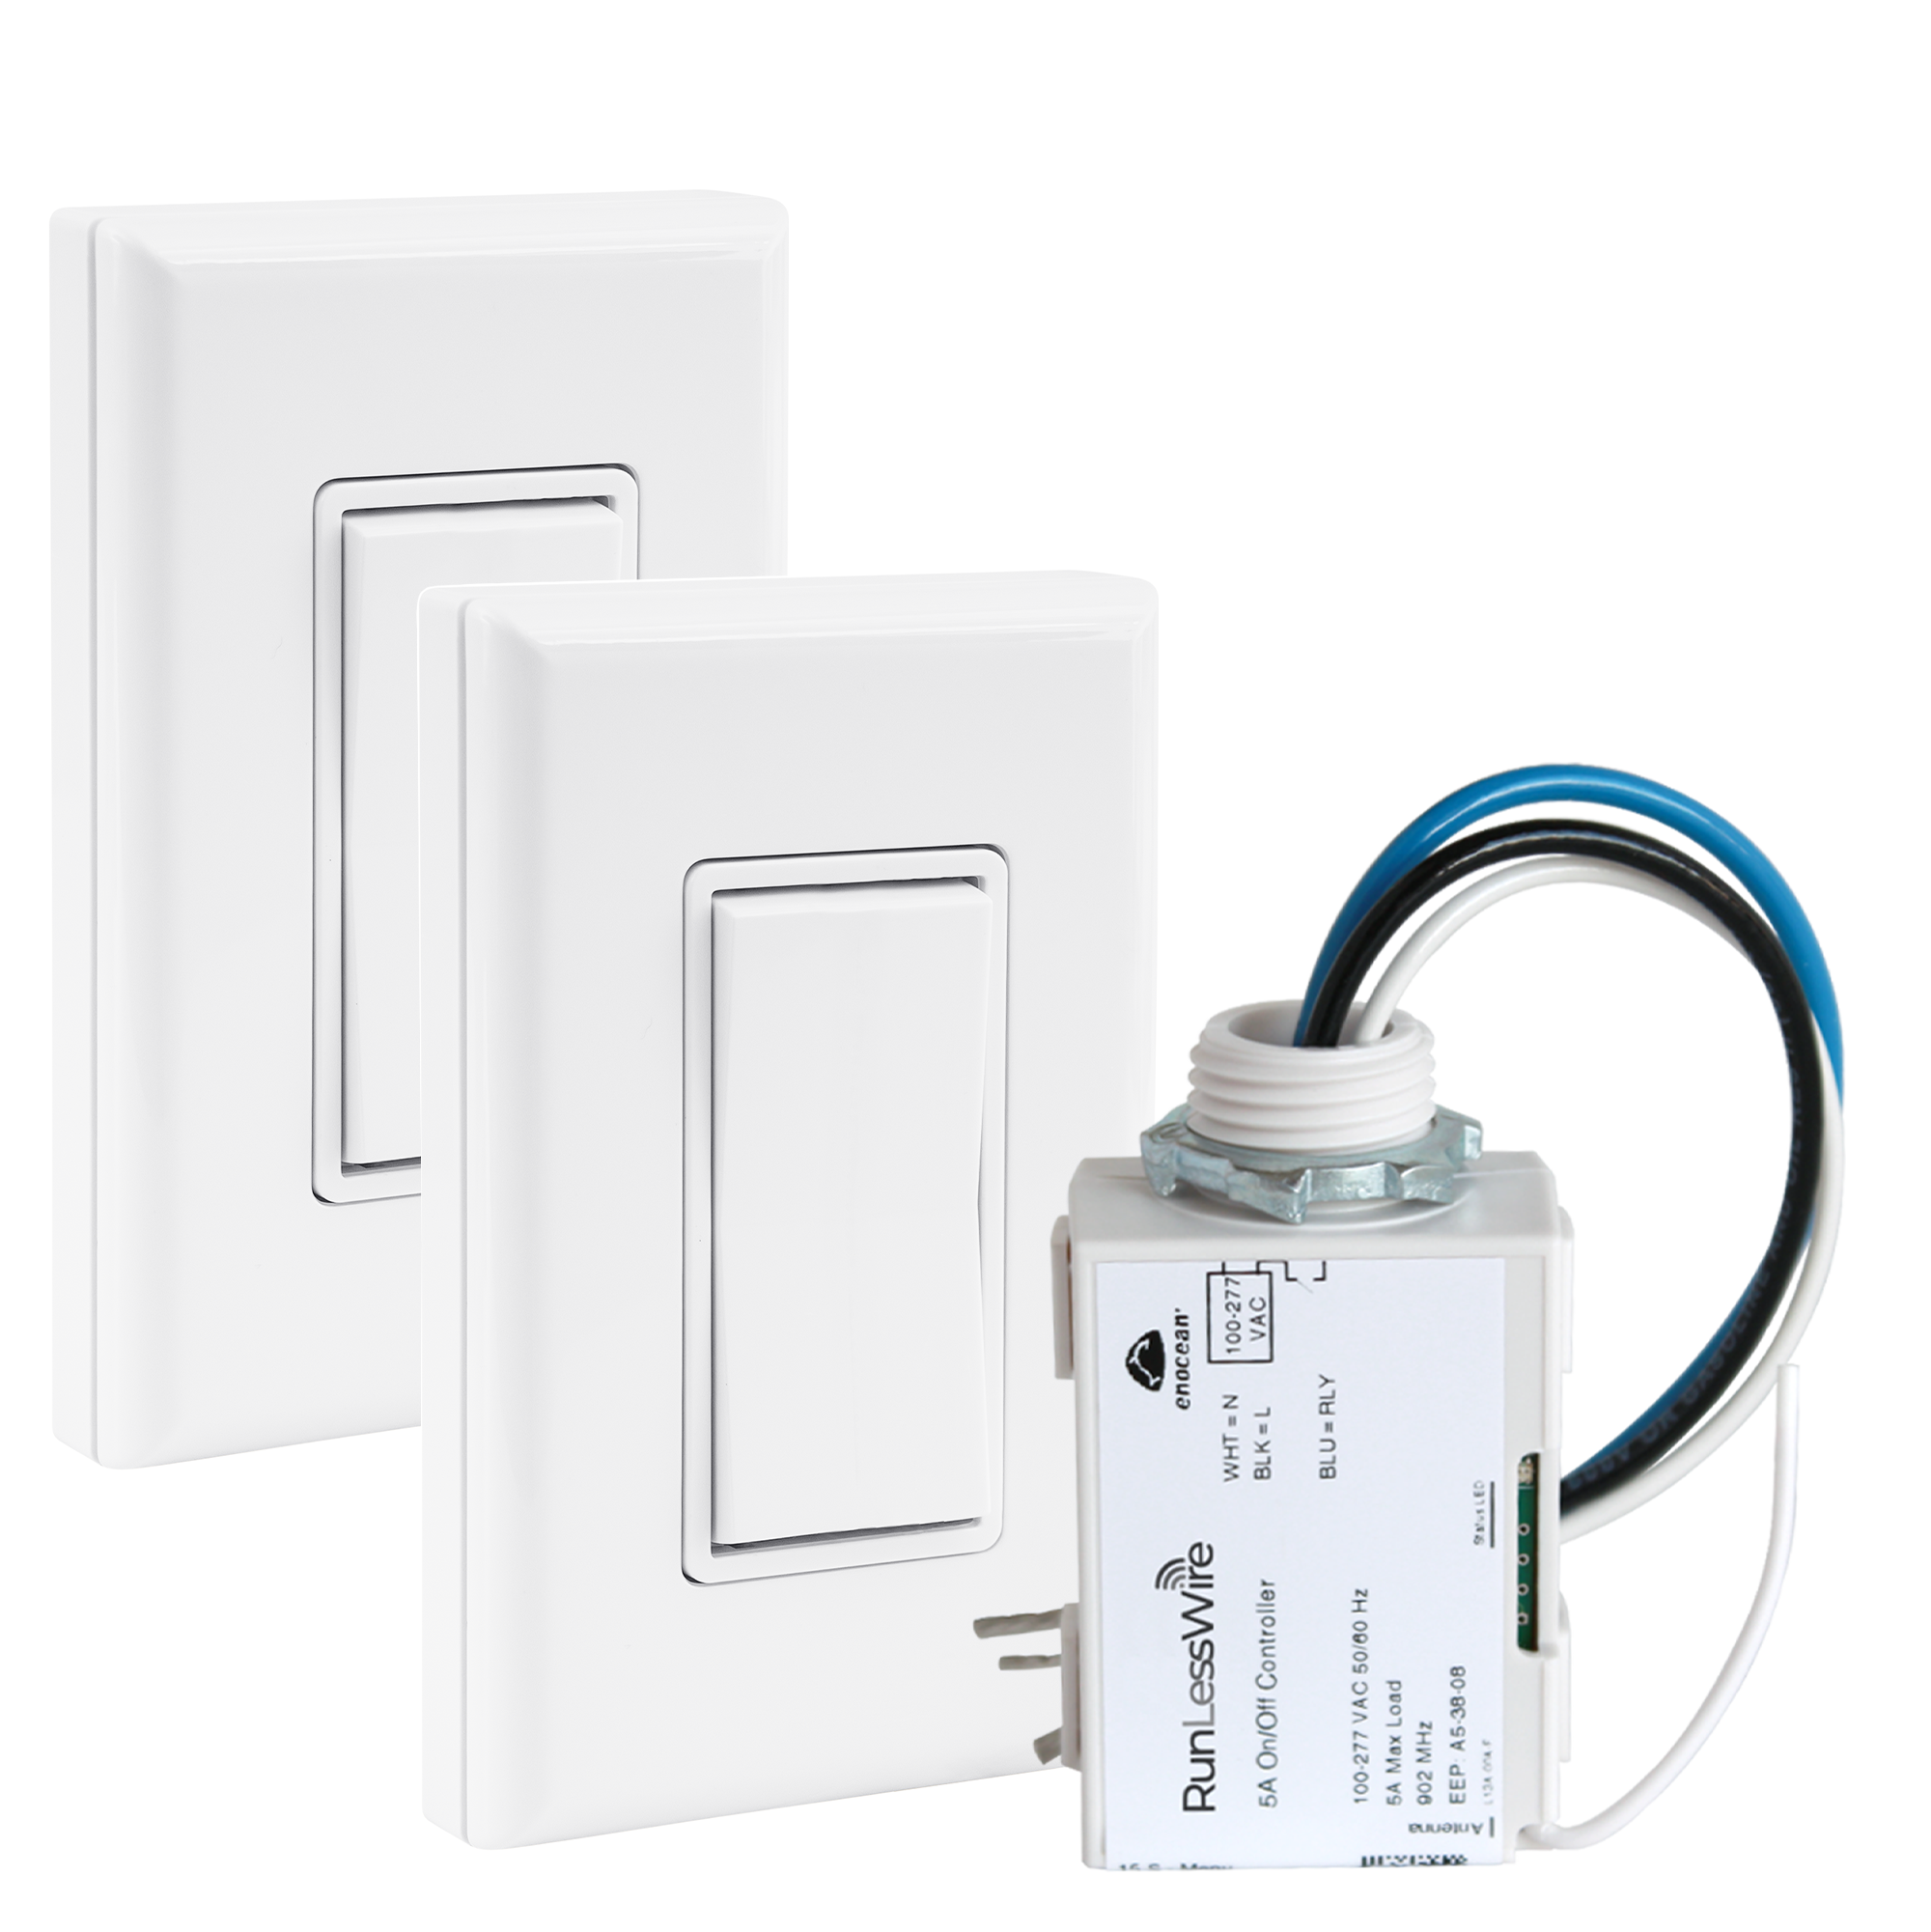 3-Way Wireless and Battery-Free Switch Kit For Lights (Includes 2 Single  Rocker Switches and 1 Receiver)